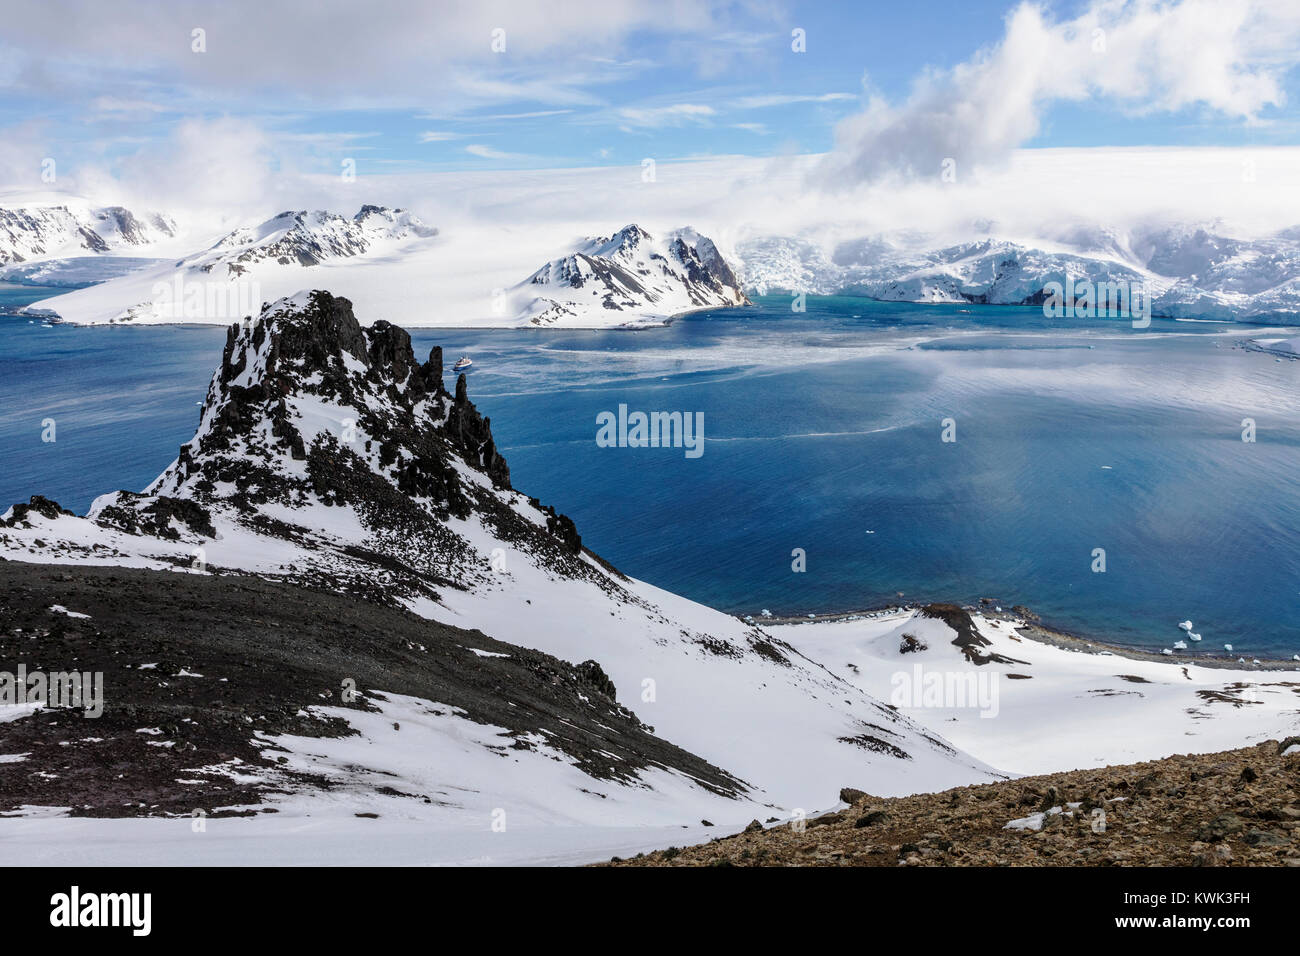 Ocean Adventurer cruise ship; Admiralty Bay; King George Island; snow & ice covered Antarctica landscape Stock Photo